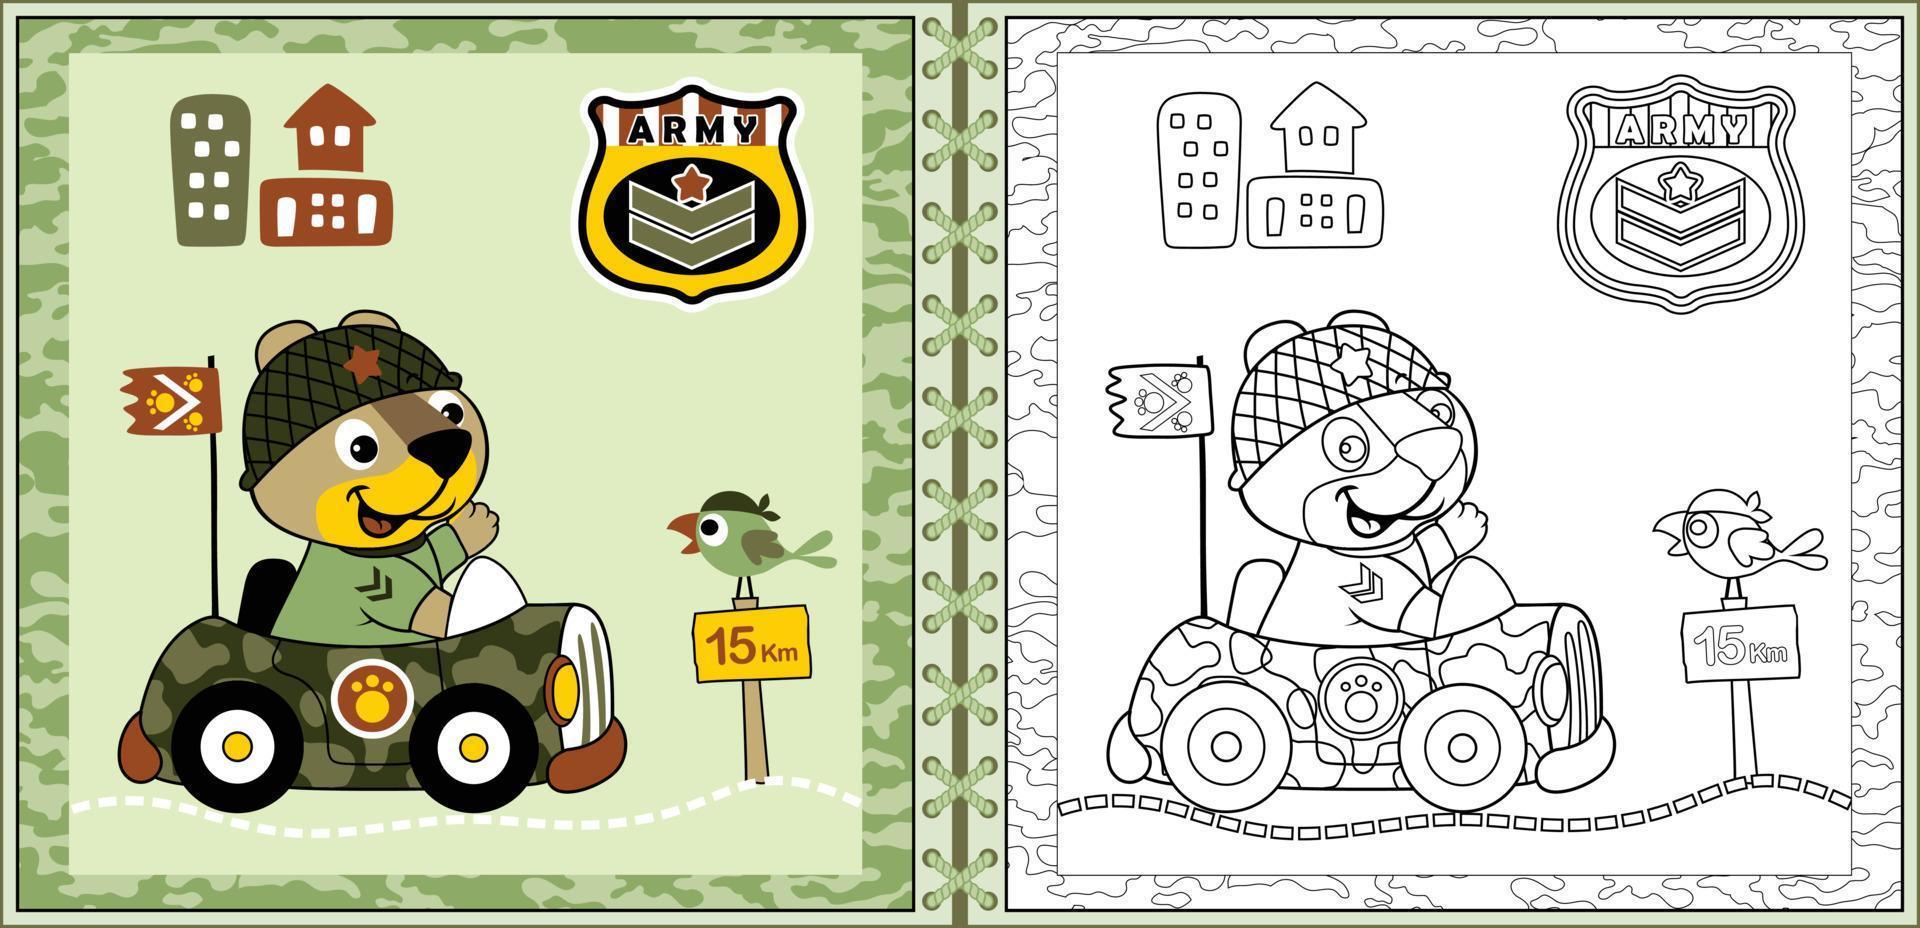 Cute cat cartoon driving military  car on camouflage frame with bird, military elements. Coloring book or page vector